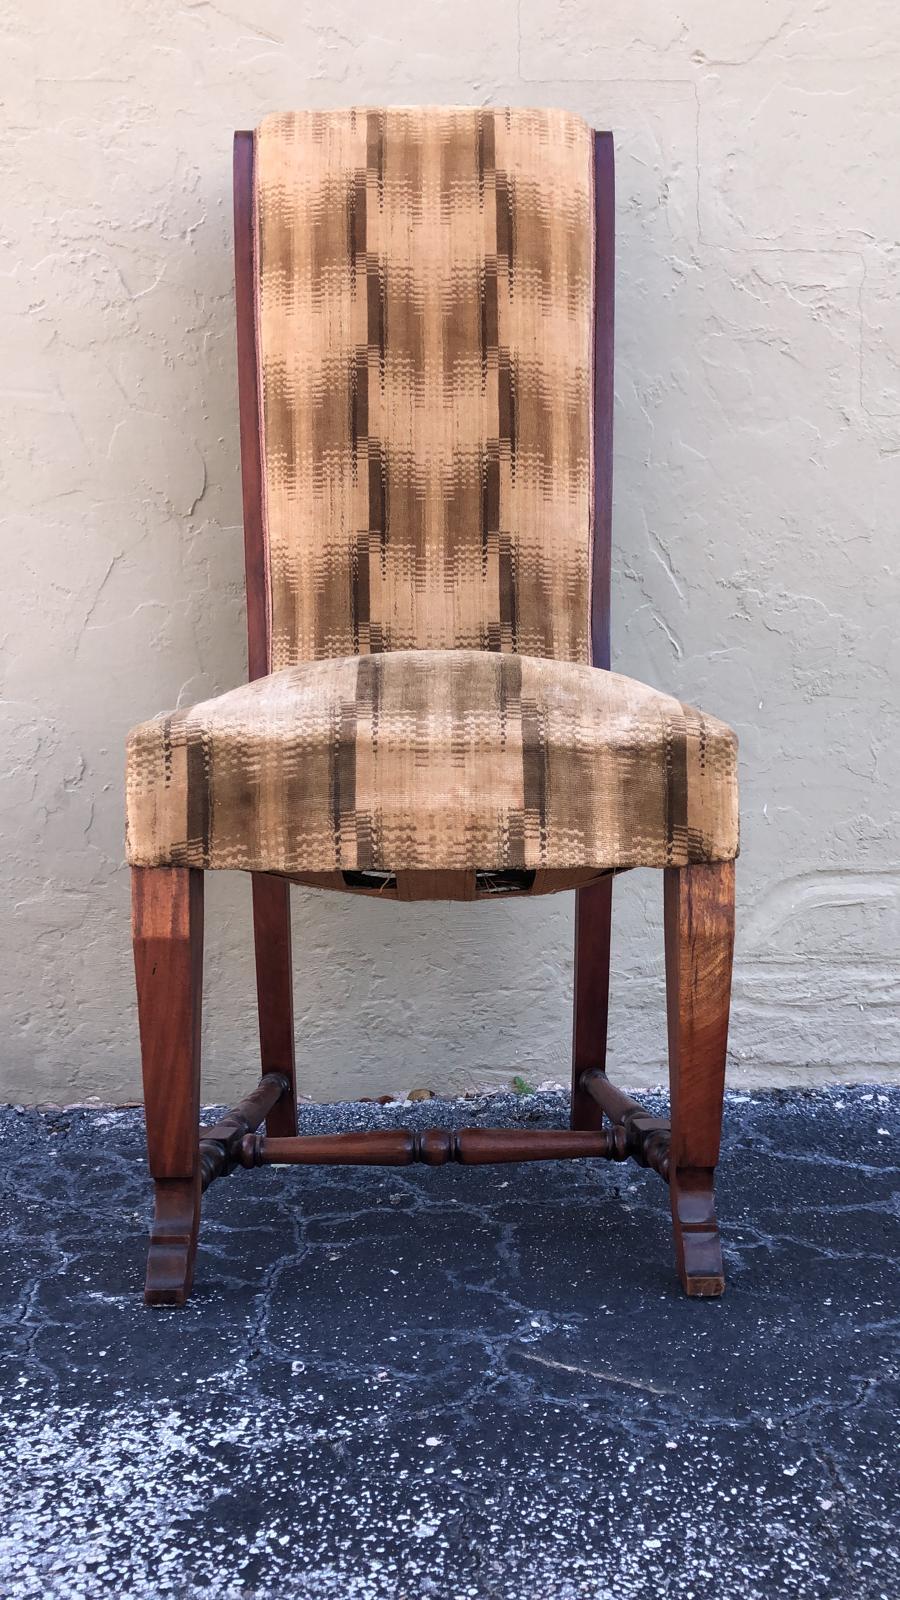 Set of fine original French modernist dining chairs. Tall backs with elegant cabriole front legs and tapered splay back legs. All six chair frames have been completely restored, reglued and French polish refinished in a dark walnut color. They are